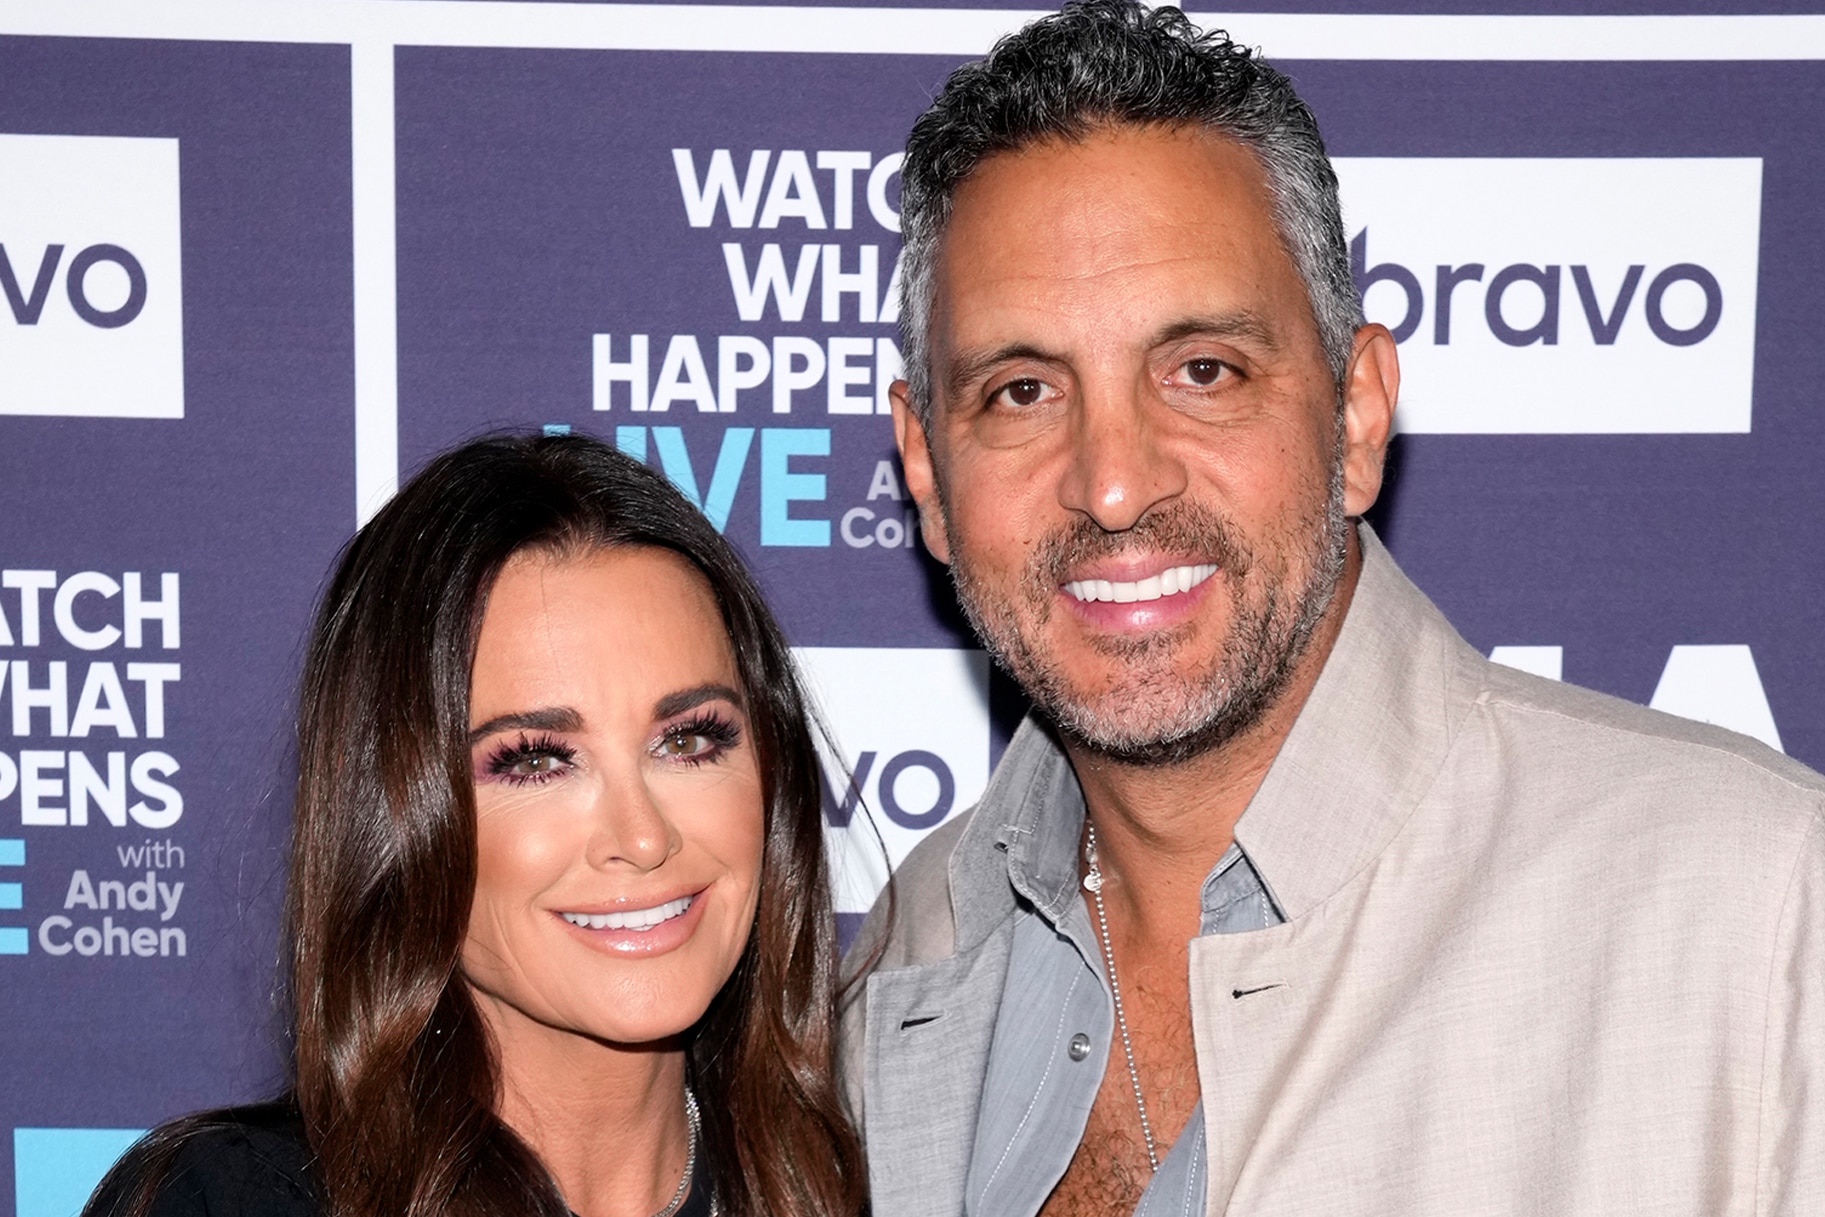 Kyle Richards and Mauricio Umansky at Watch What Happens Live.